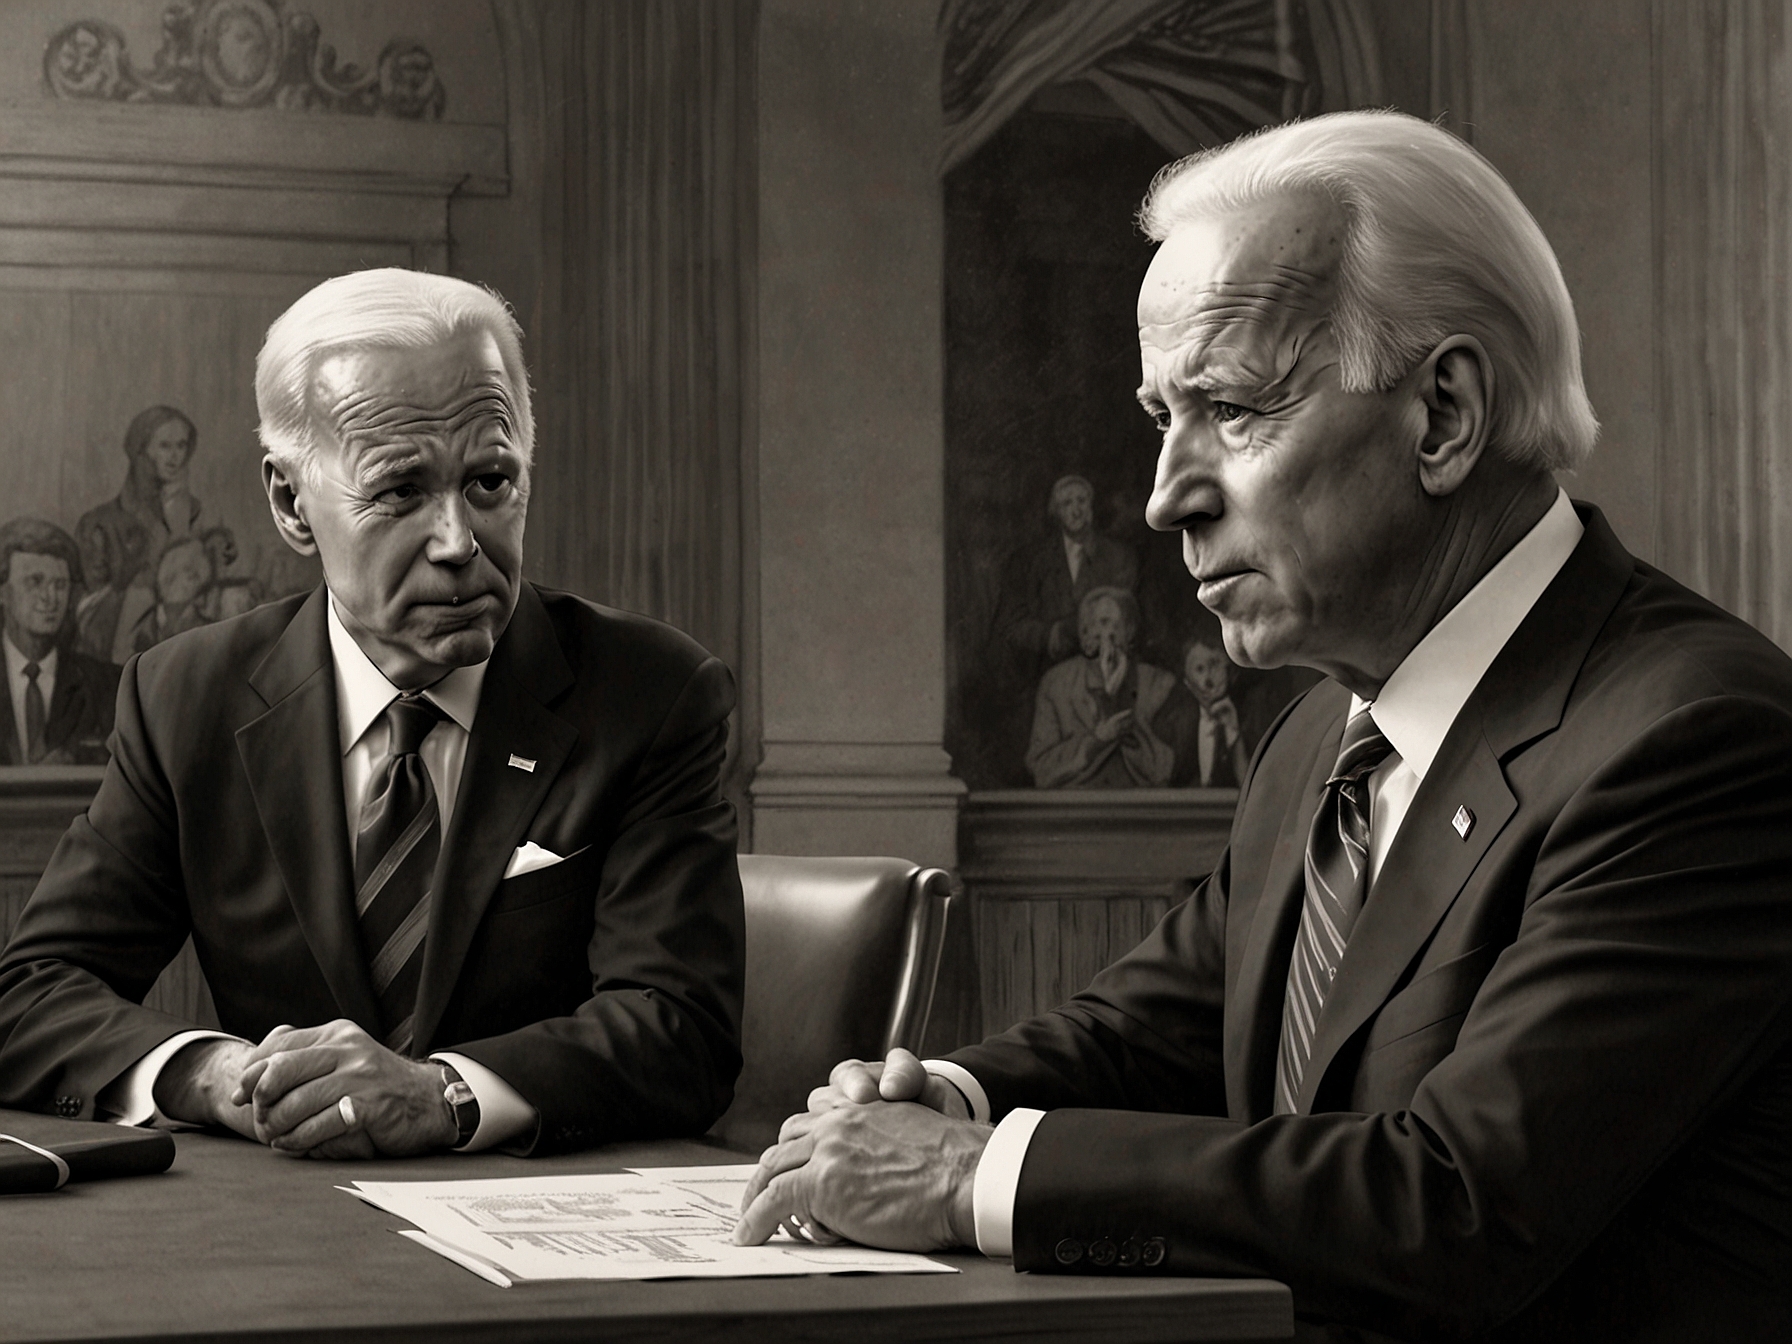 A tense moment during a debate between President Joe Biden and former President Donald Trump, highlighting Biden's stumbles and triggering discussions within the Democratic Party.